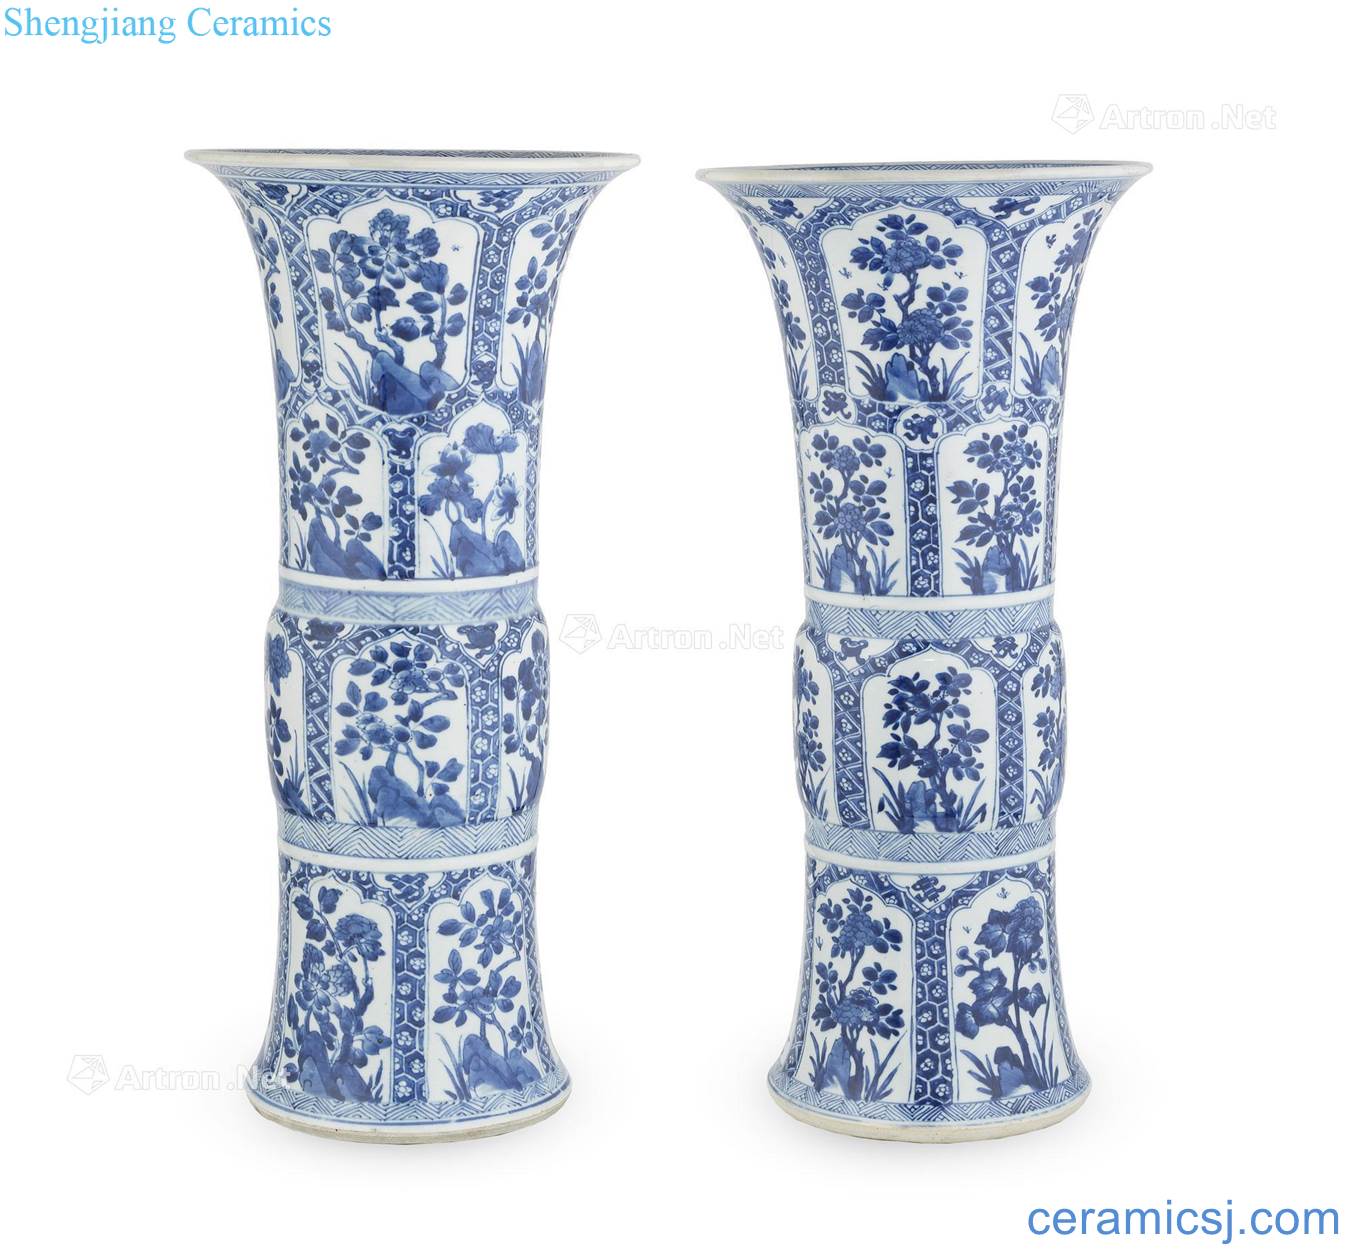 The qing emperor kangxi Blue and white medallion figure flower vase with a pair of flowers